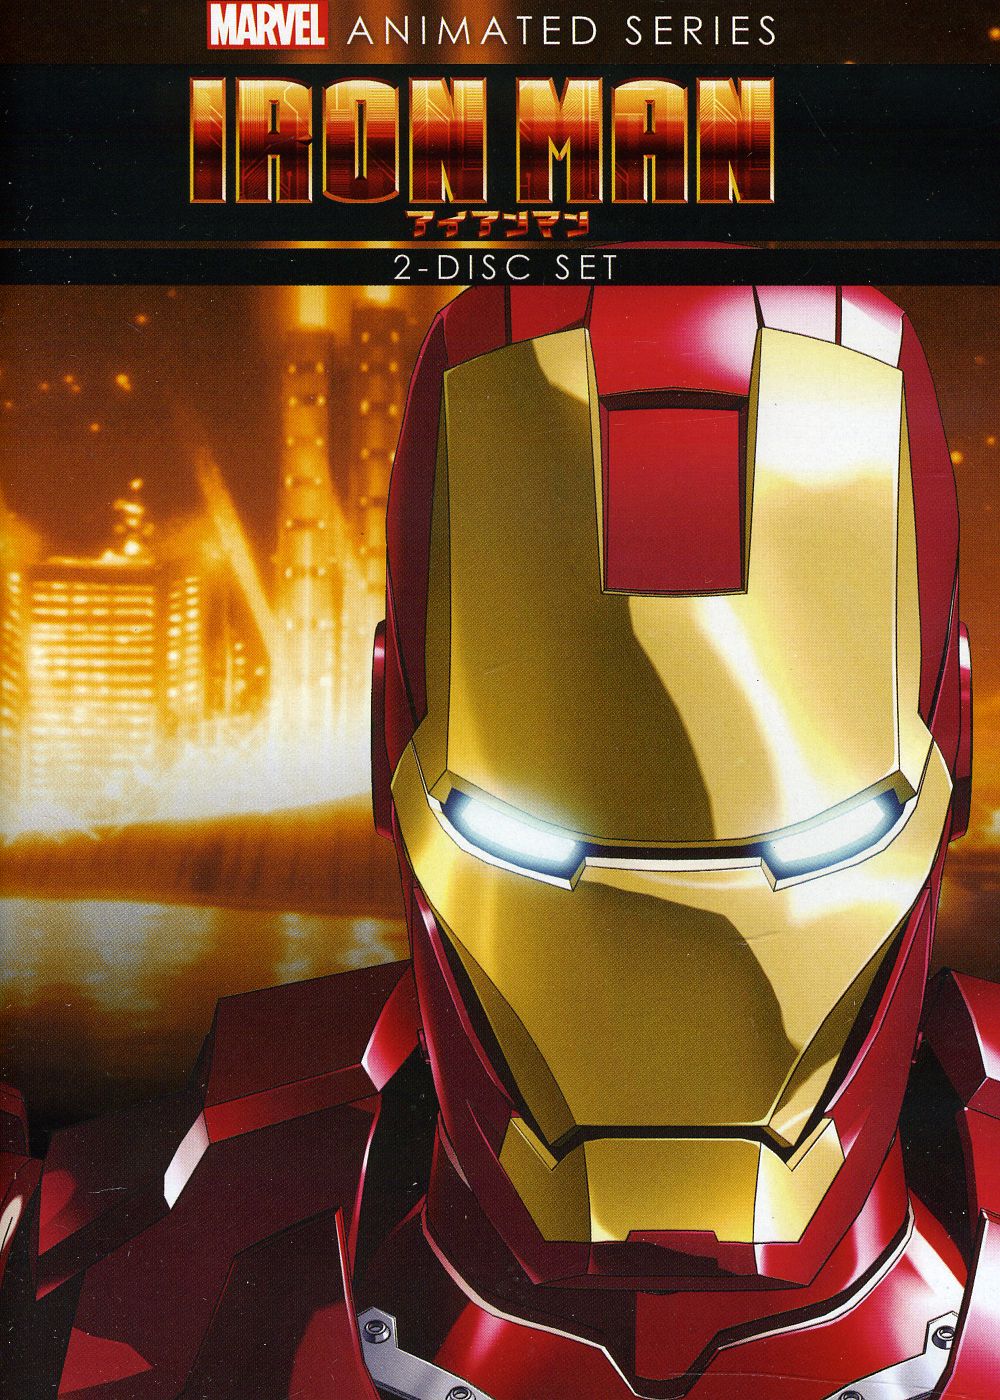 INTRODUCING THE NEW REVIEW SPOT: IRON MAN ANIMATED SERIES MARVEL 